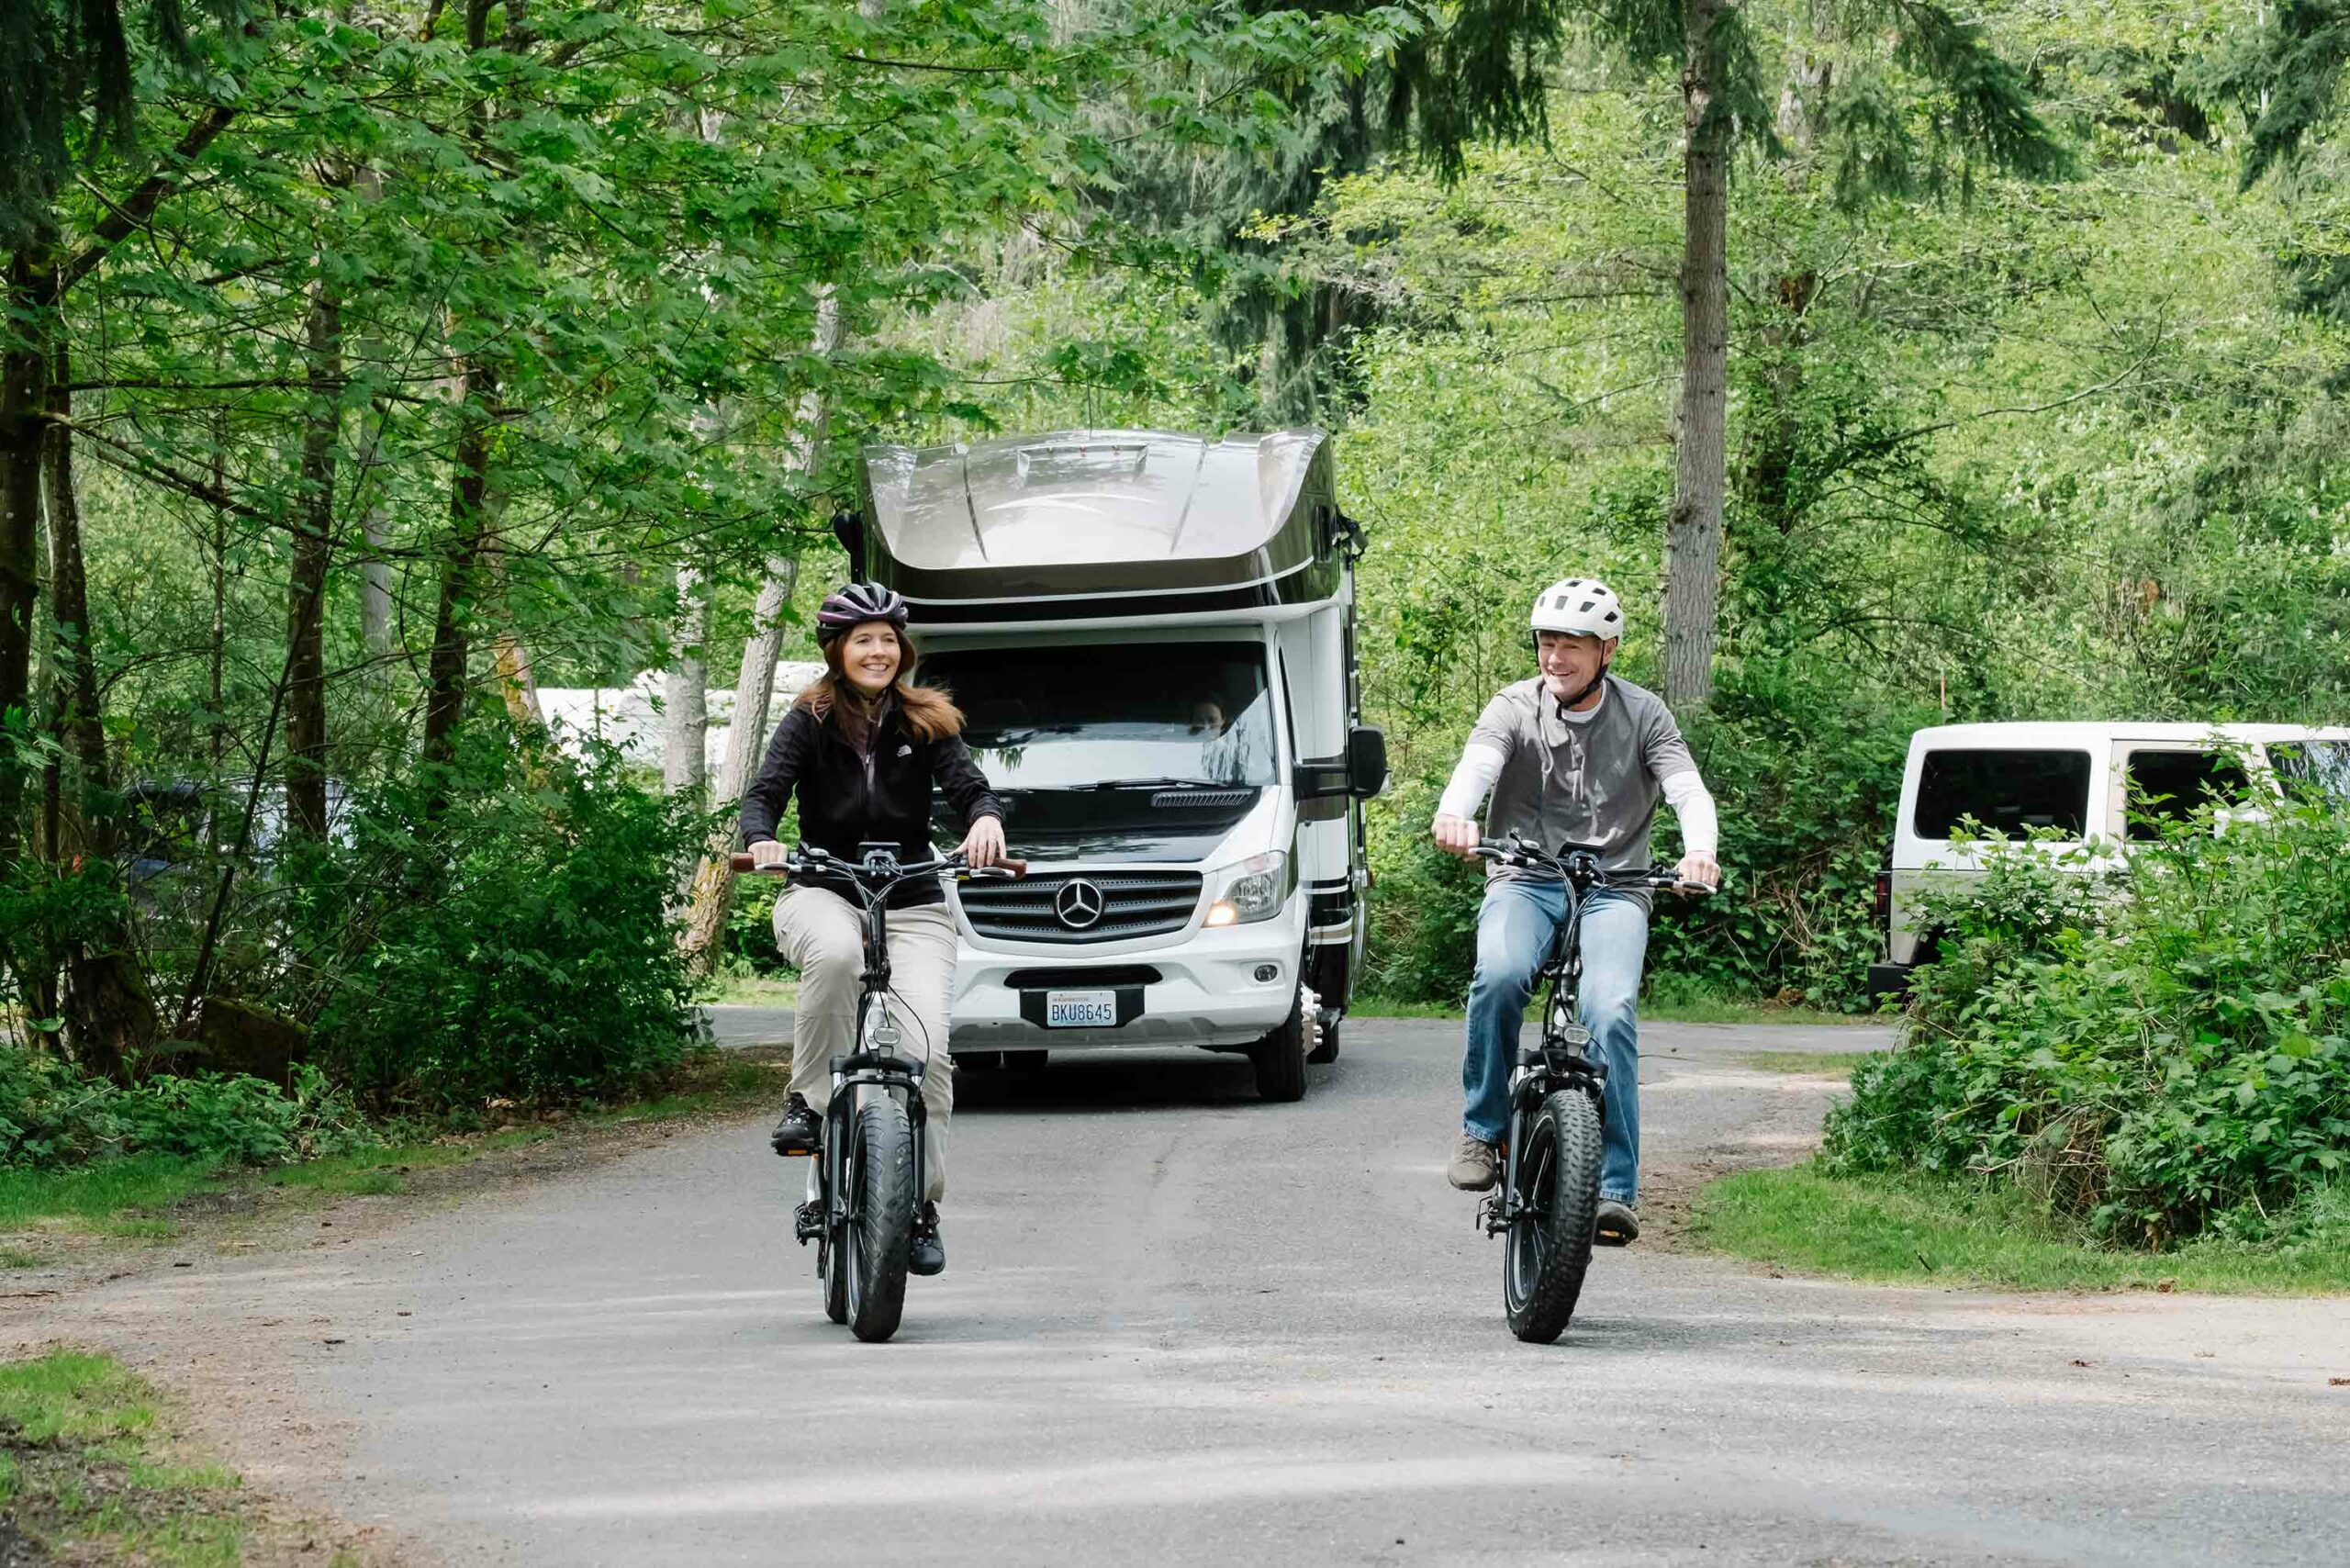 Two people load up a RadMini onto an RV.